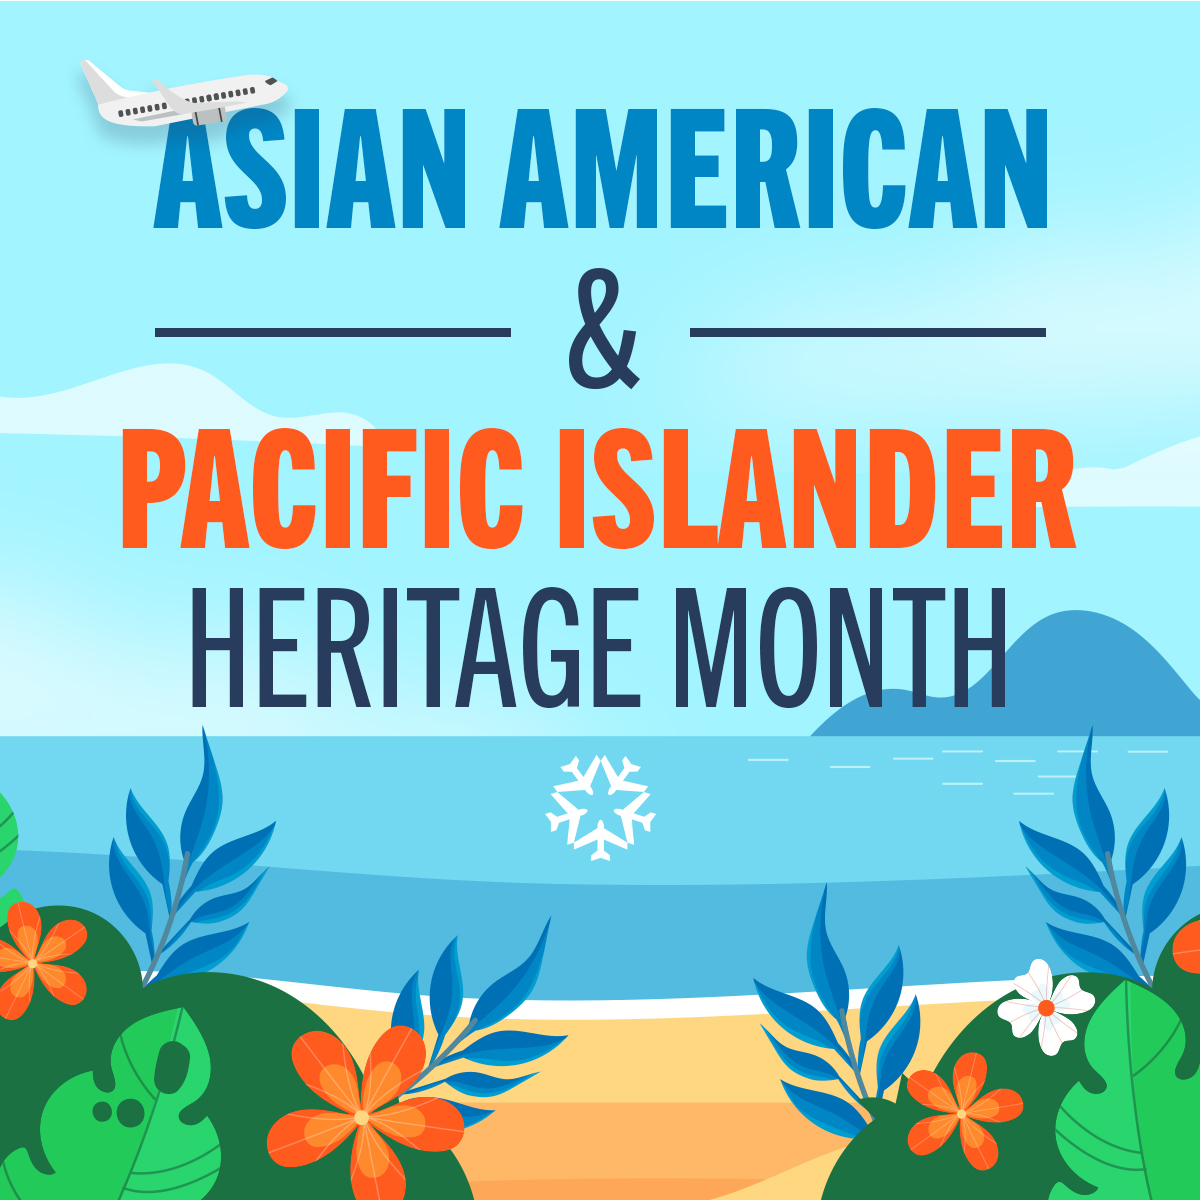 U.S. airlines are proud to commemorate Asian American and Pacific Islander Heritage Month this May! The #AAPI community has a rich history and is an integral part of the past, present and future aviation industry.